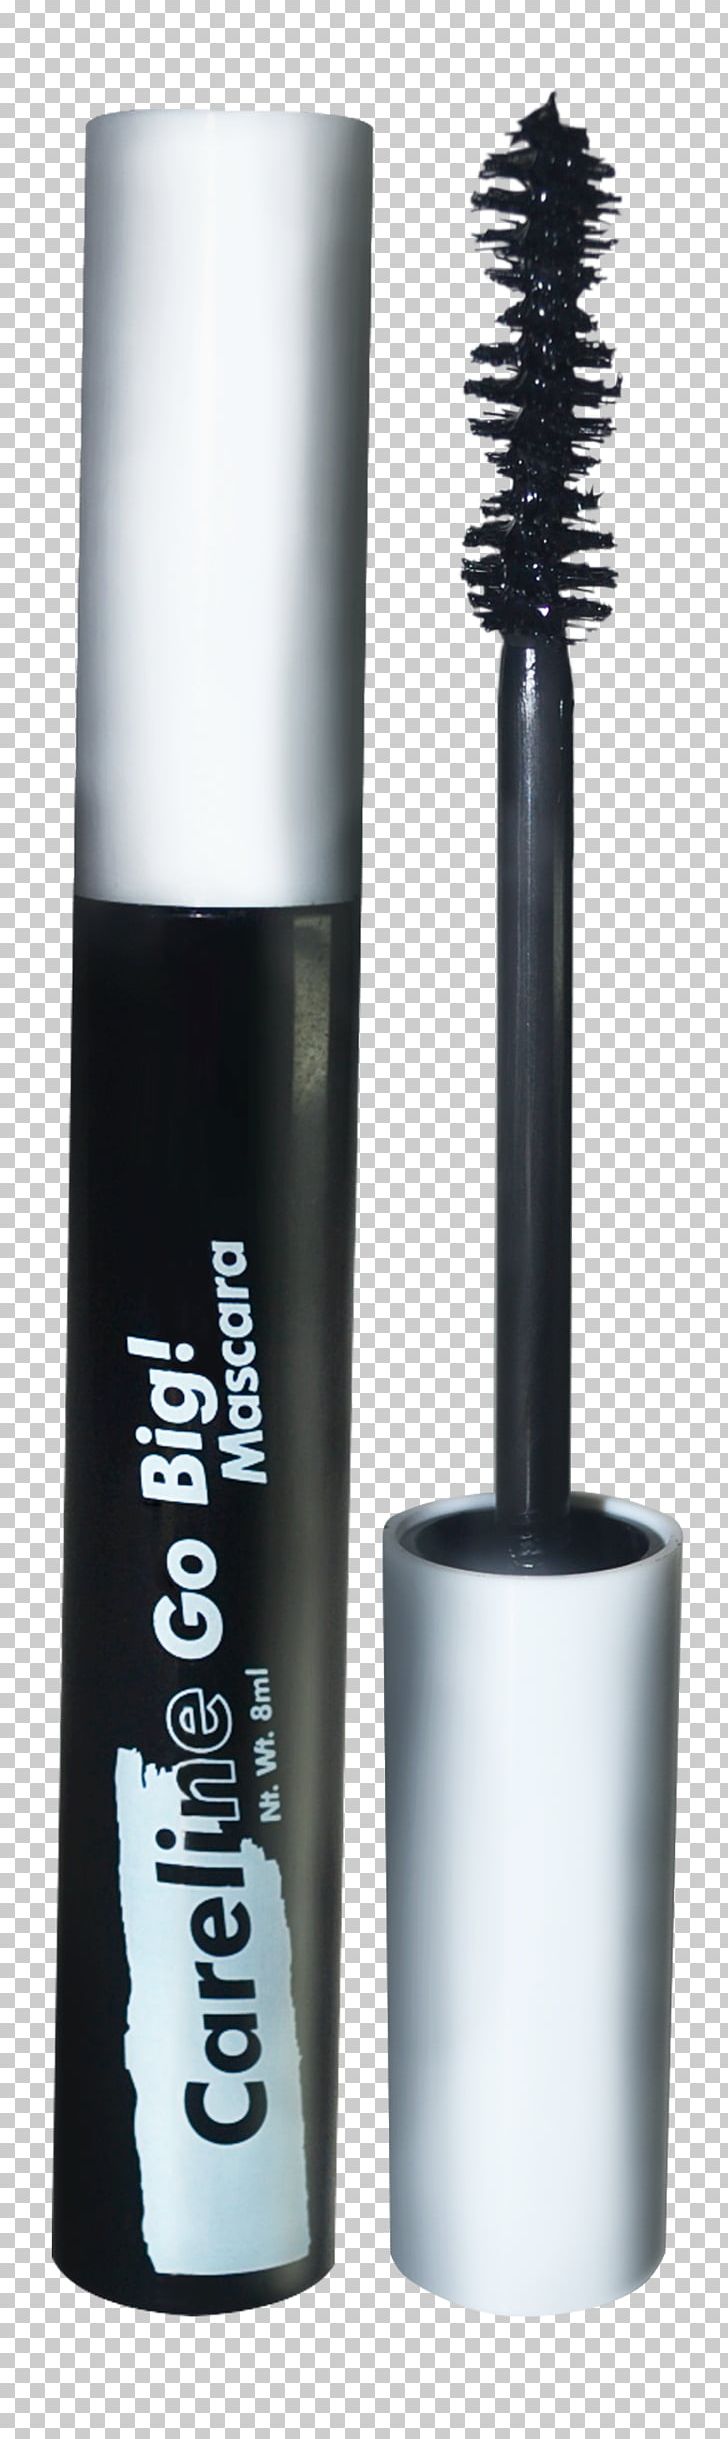 Mascara Product Design PNG, Clipart, Abs Cbn, Cbn, Cosmetics, Hot Stuff, Mascara Free PNG Download